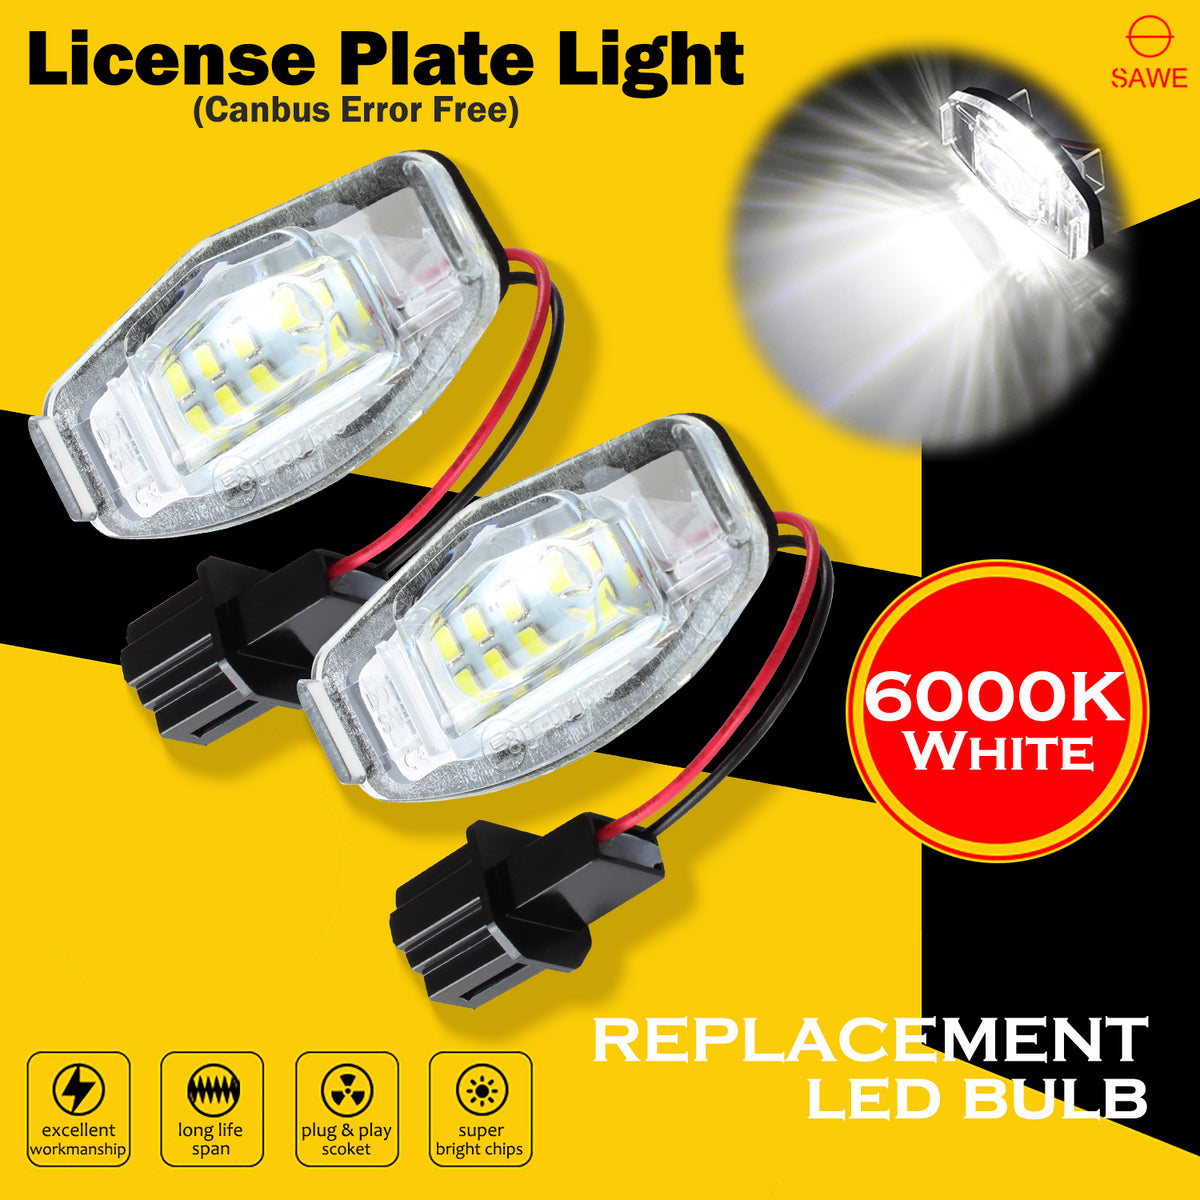 LED License Plate Light Housing For Honda Accord Civic Odyssey Acura TSX TL Direct Fit - White